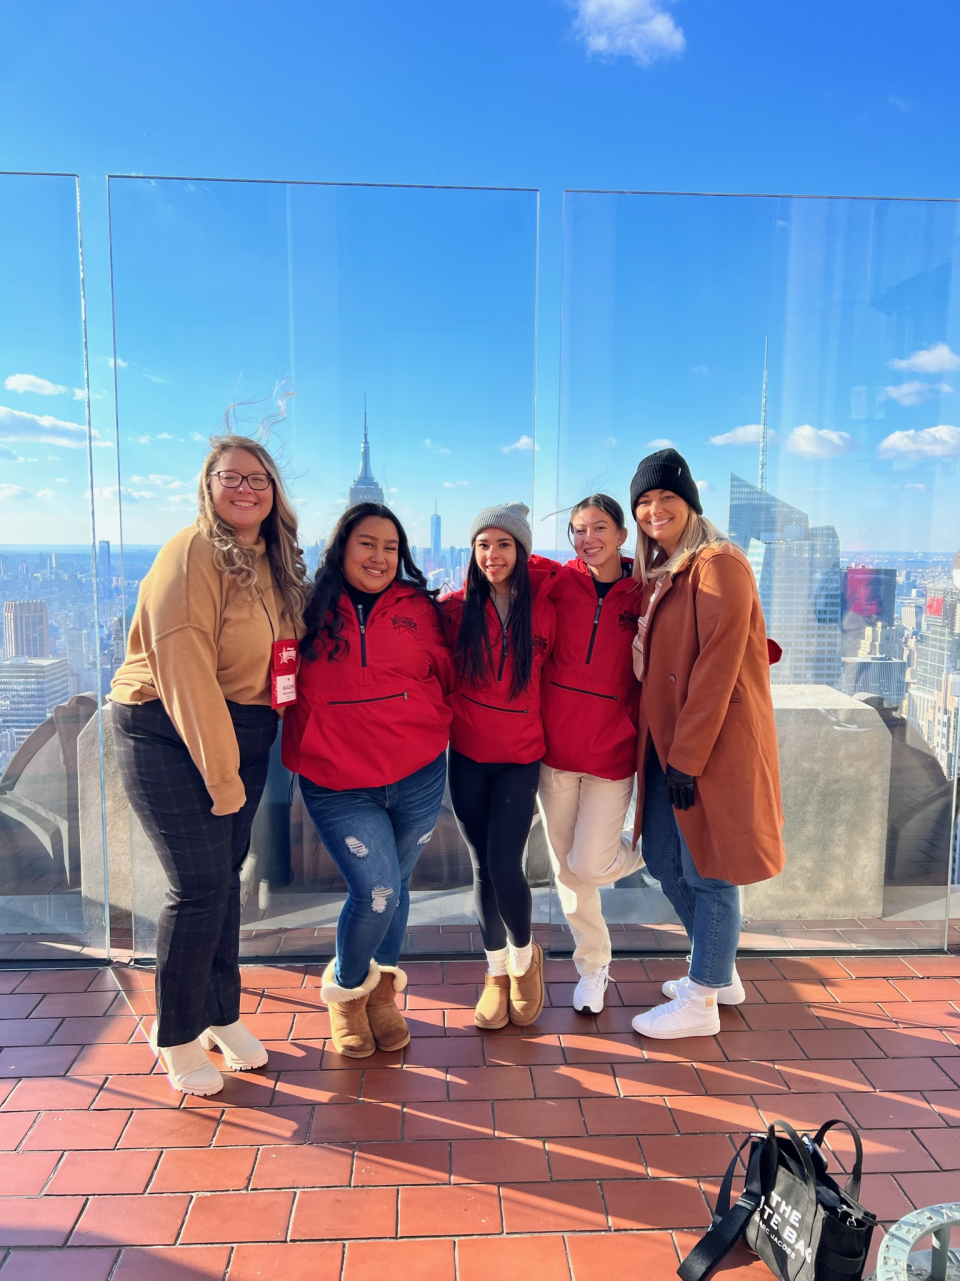 JV Coach Ashlyn Wilkerson, students Vanessa Arredondo-Alamilla, Olivia Decruz and Abby Perez-Ramirez, and Coach Lauren Albert at the observation deck on the top of Rockefeller Center in New York City. The students, part of Flagler-Palm Coast High School's Starlets dance troupe, performed in the 2022 Macy's Thanksgiving Day Parade.